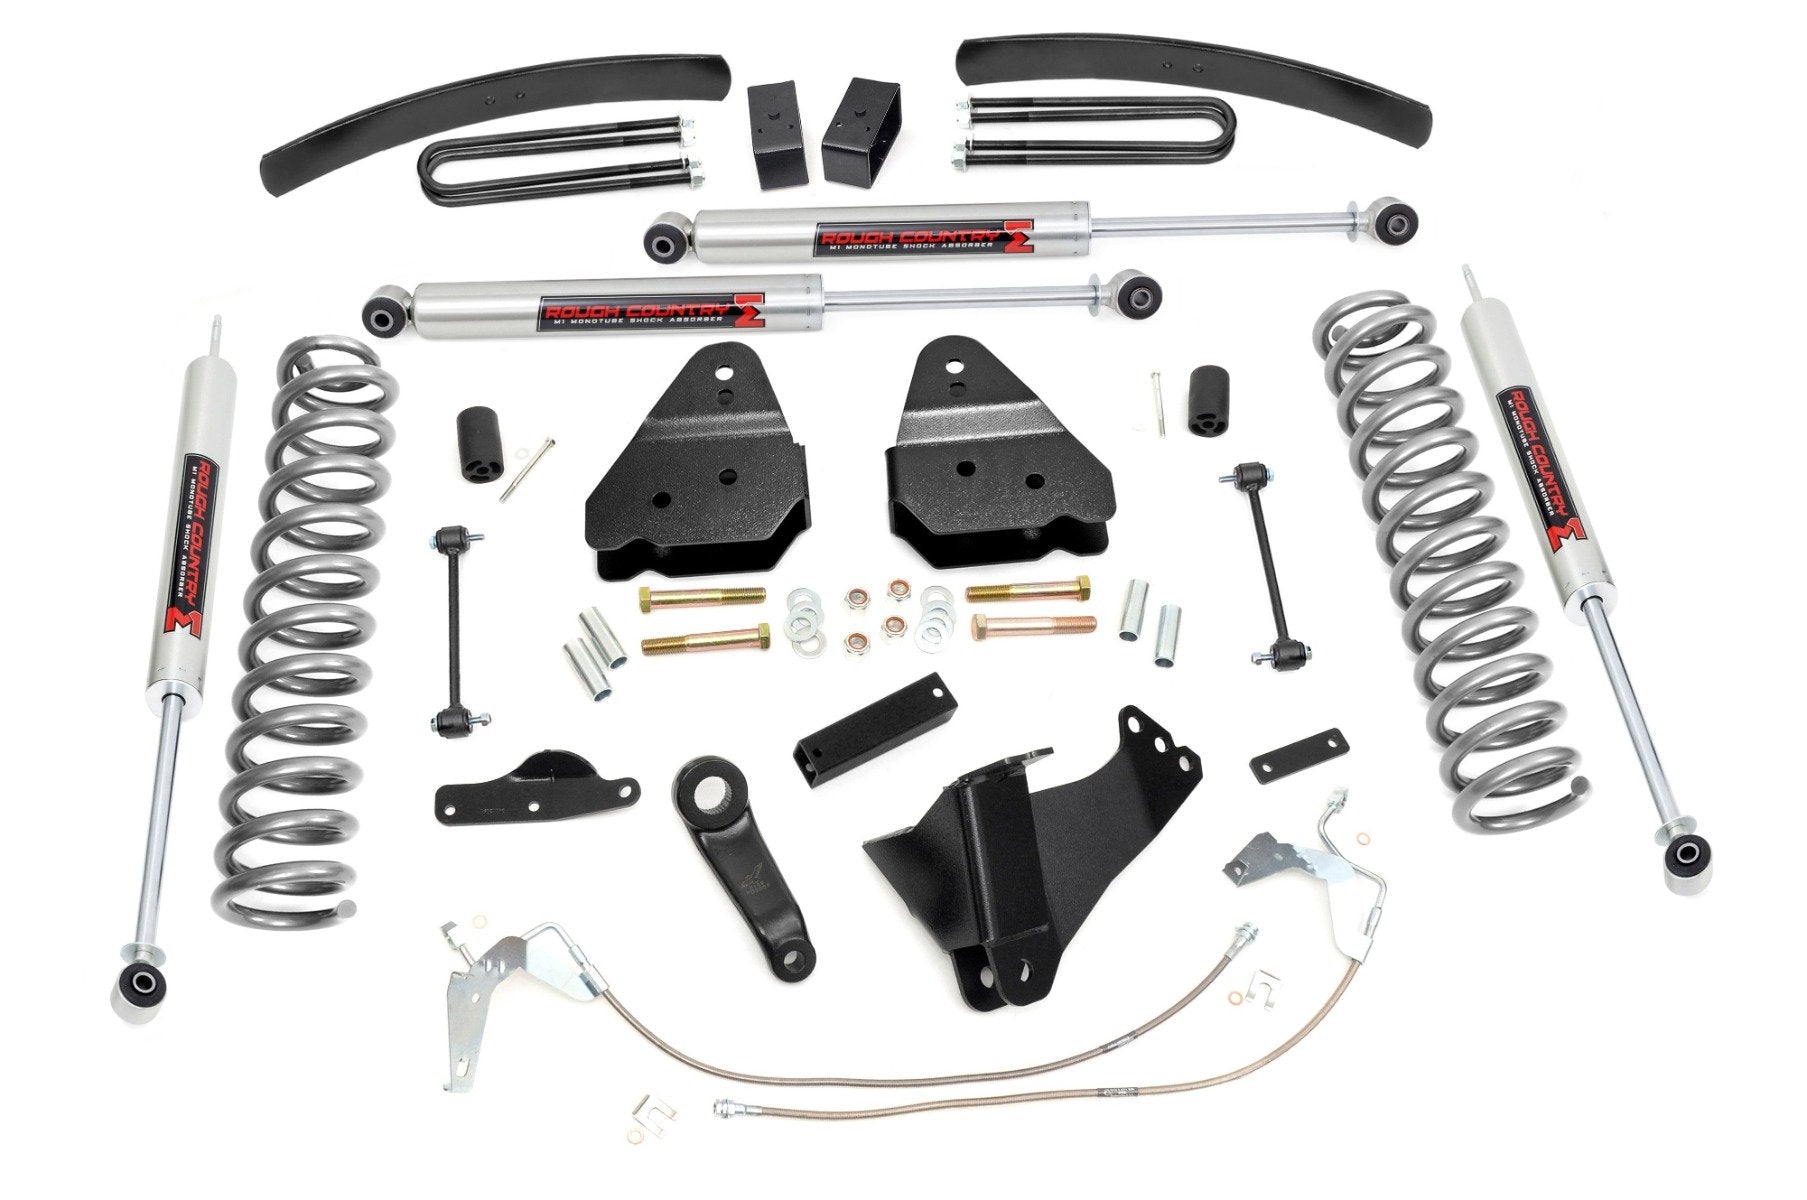 Rough Country 6 Inch Lift Kit | Diesel | M1 | Ford F-250/F-350 Super Duty 4WD (2008-2010)